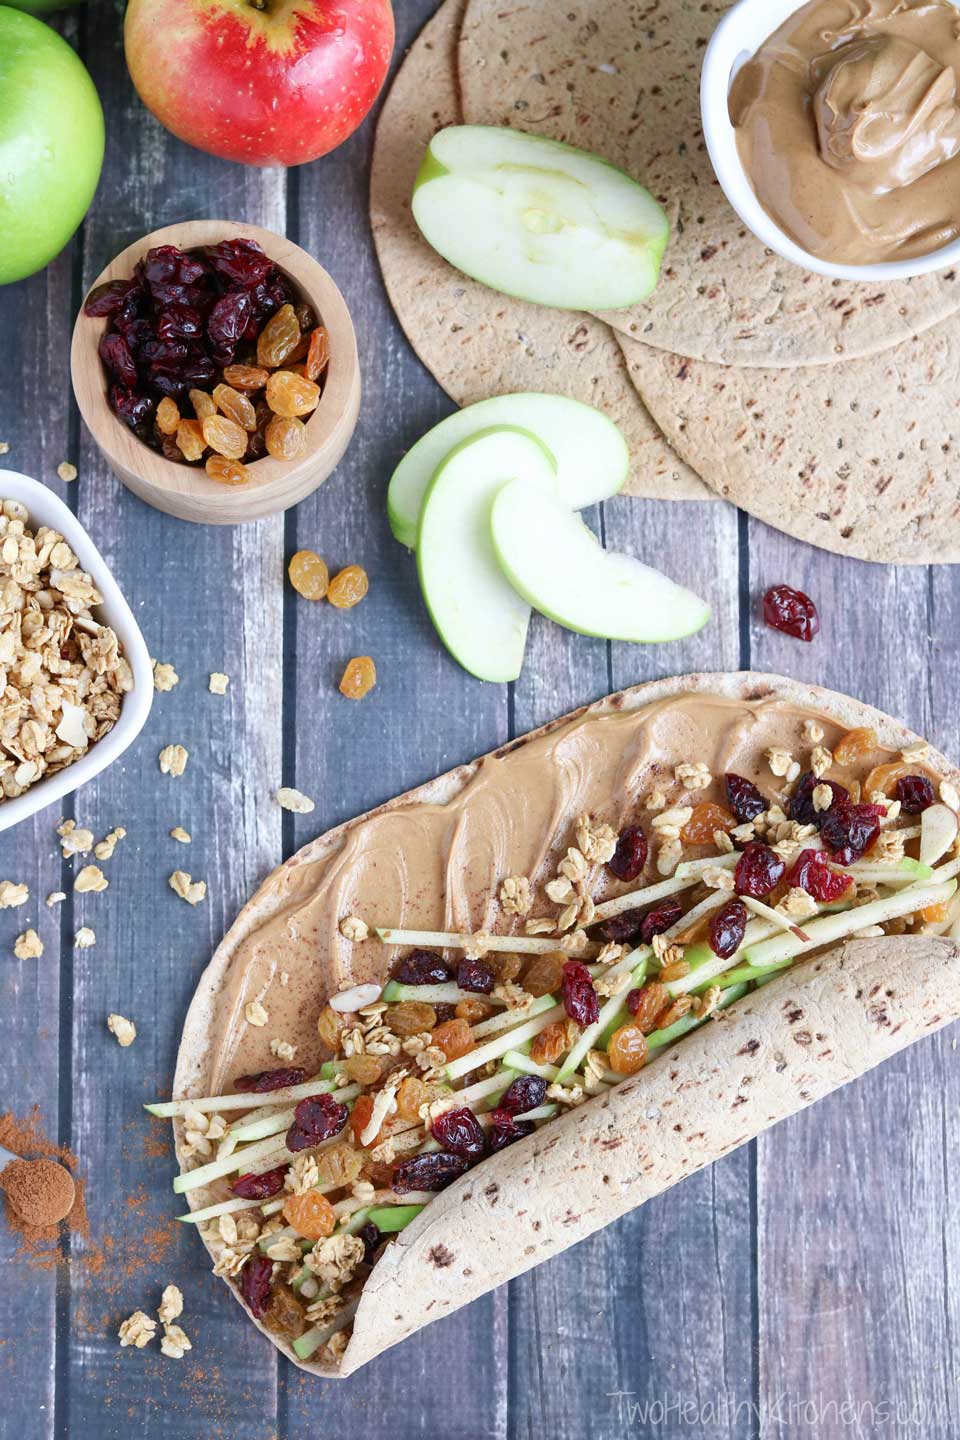 Full of protein, whole grains and fruits, this wrap recipe is fast, easy and so wonderfully adaptable! Our crunchy Peanut Butter Sandwich Wraps are perfect for on-the-go meals and make-ahead lunches (you can even go nut-free for school lunches)! Change up your peanut butter and jelly routine with this new peanut butter recipe idea that’s got a delicious combination of sweet, crunchy, chewy and creamy ingredients your whole family will love! {ad} | www.TwoHealthyKitchens.com